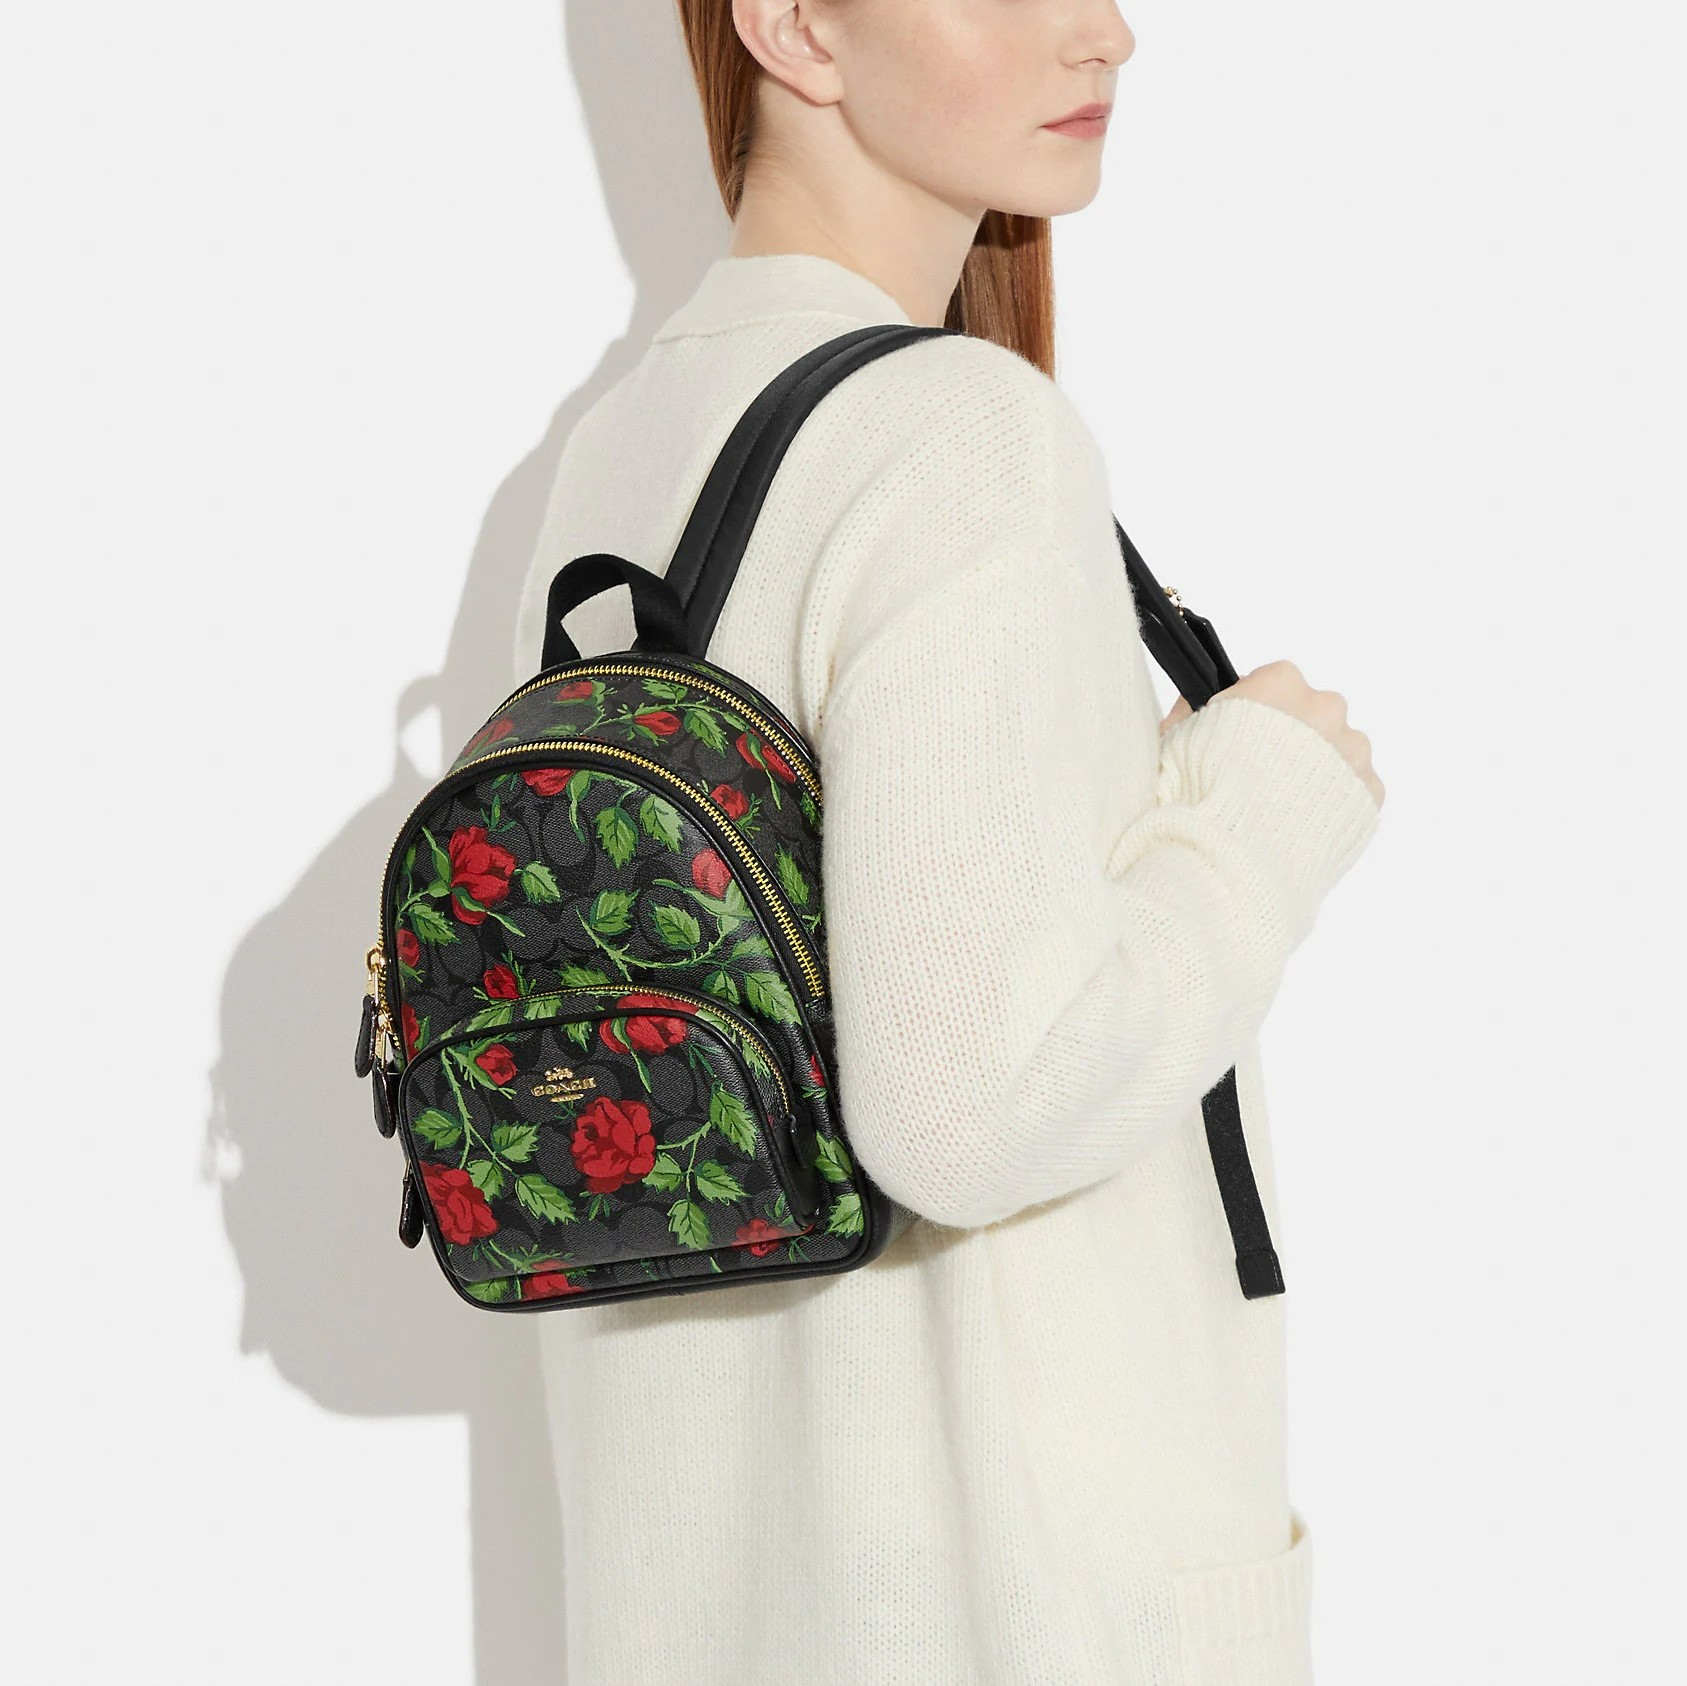 BALO MINI COACH HOA HỒNG COURT BACKPACK IN SIGNATURE CANVAS WITH FAIRYTALE ROSE PRINT 4